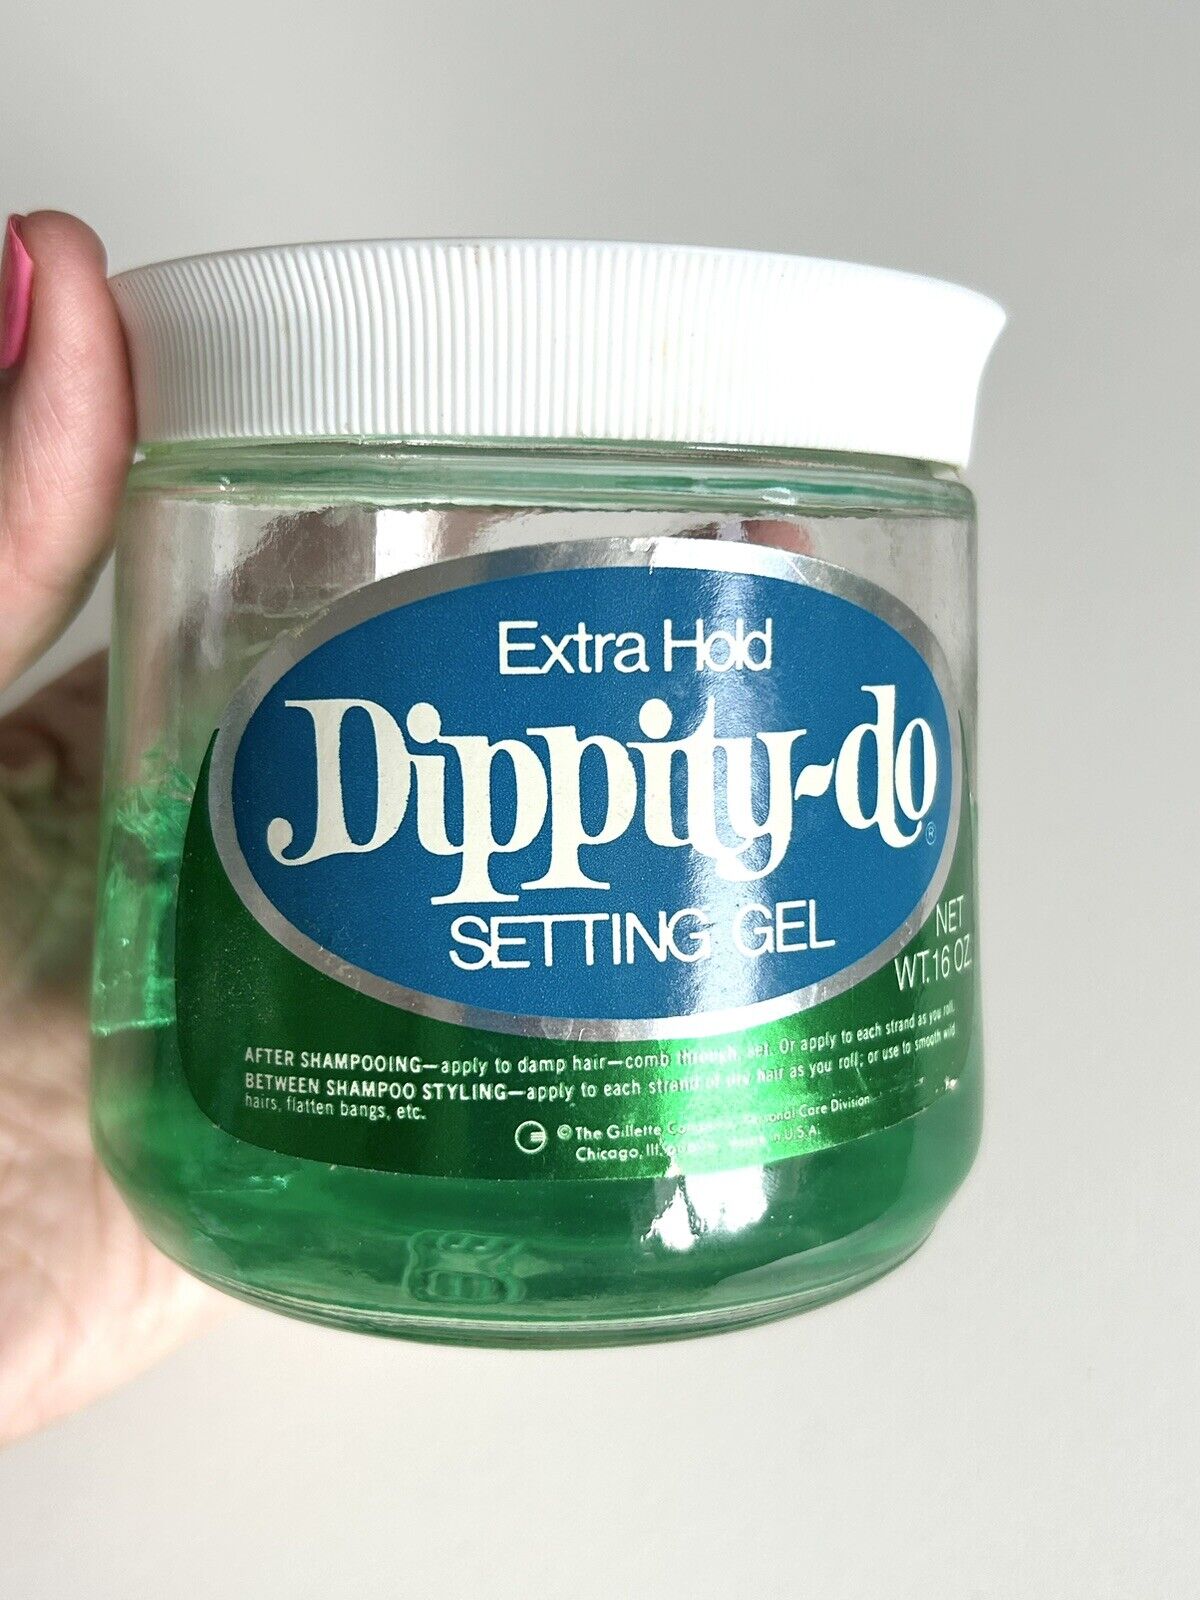 Vintage Glass Jar Of Dippity-do Extra Hold Setting Gel Hair Stylings Green